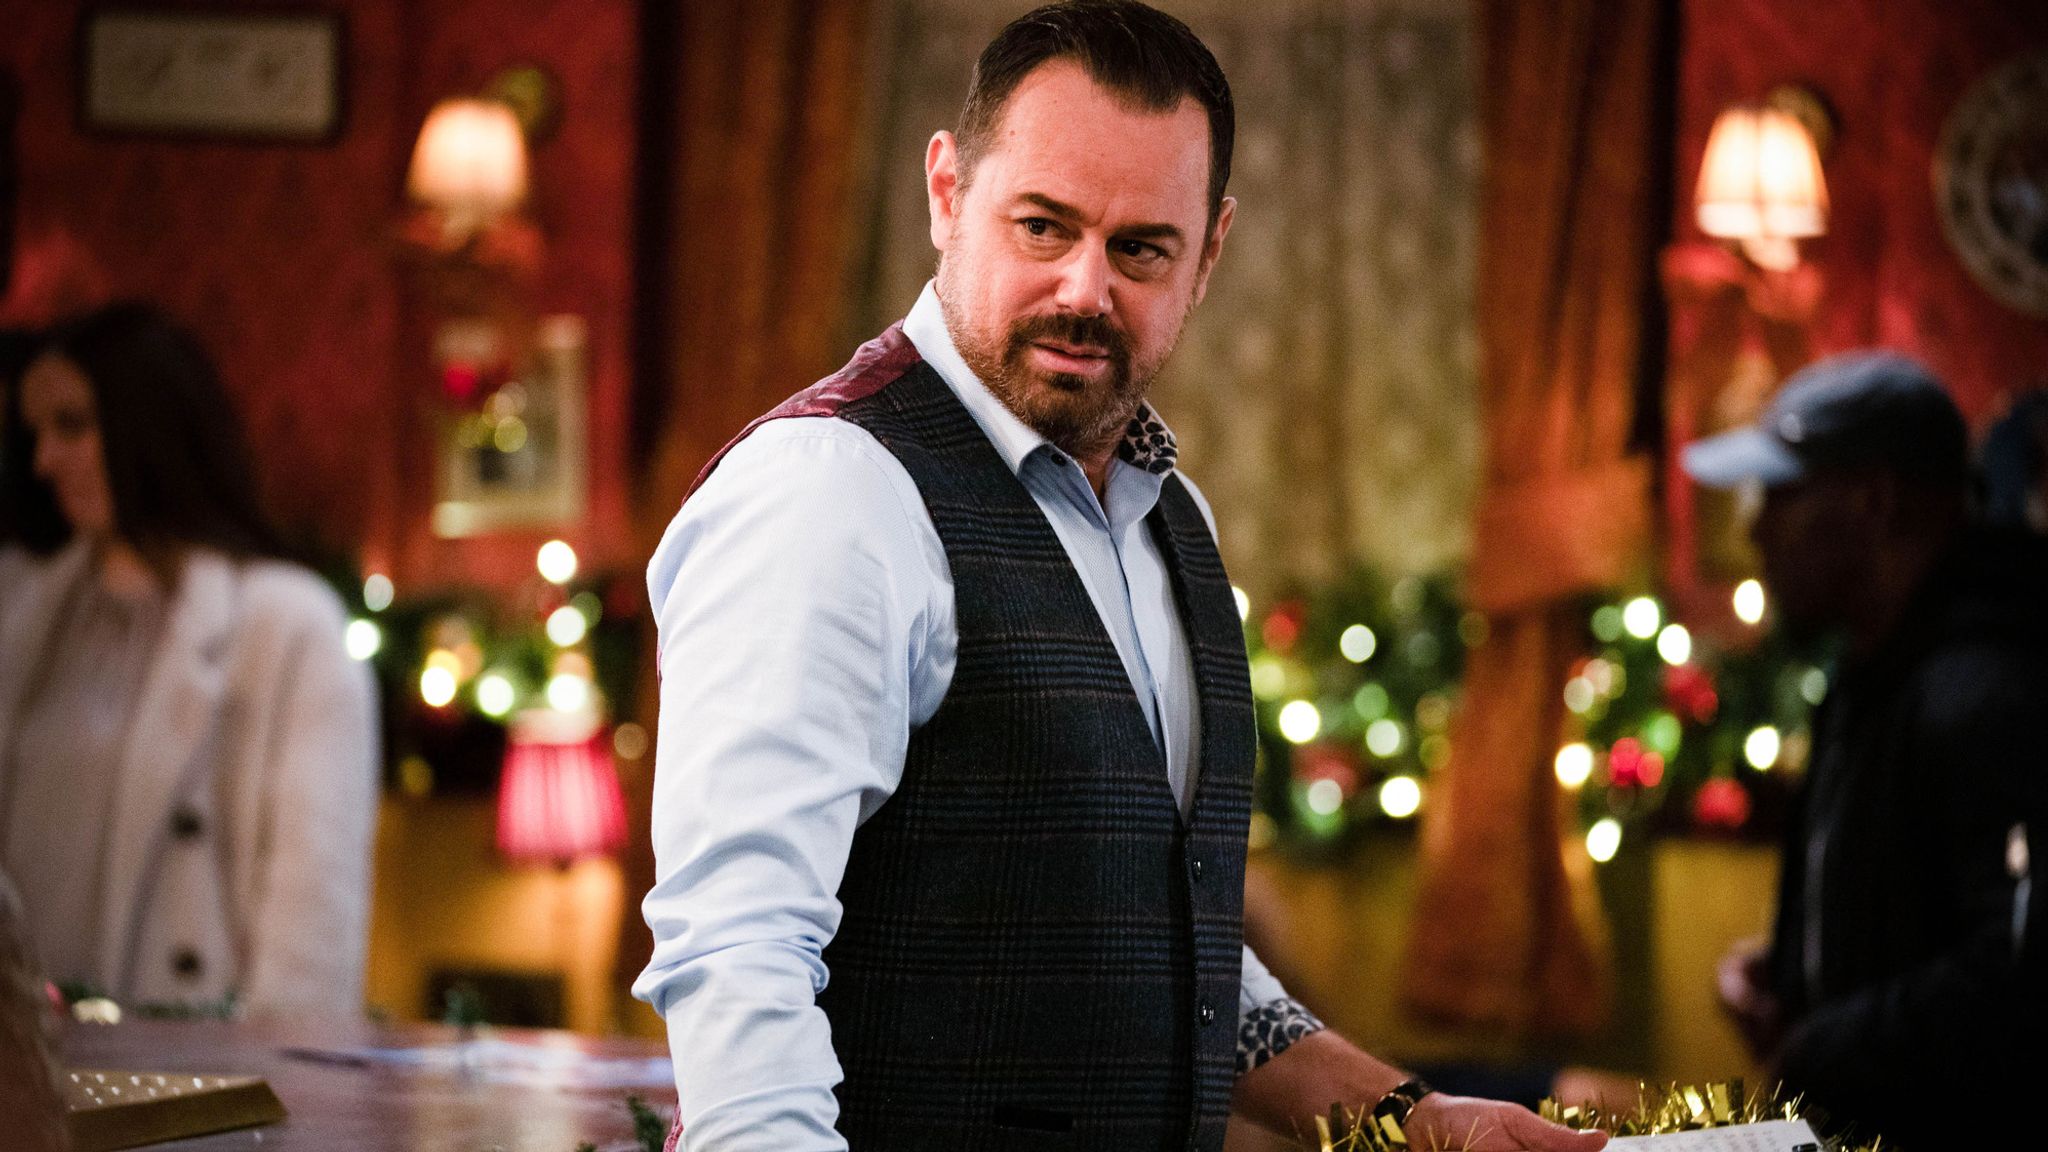 Danny Dyer Leaving Eastenders Later In The Year Bbc Confirms Ents And Arts News Sky News